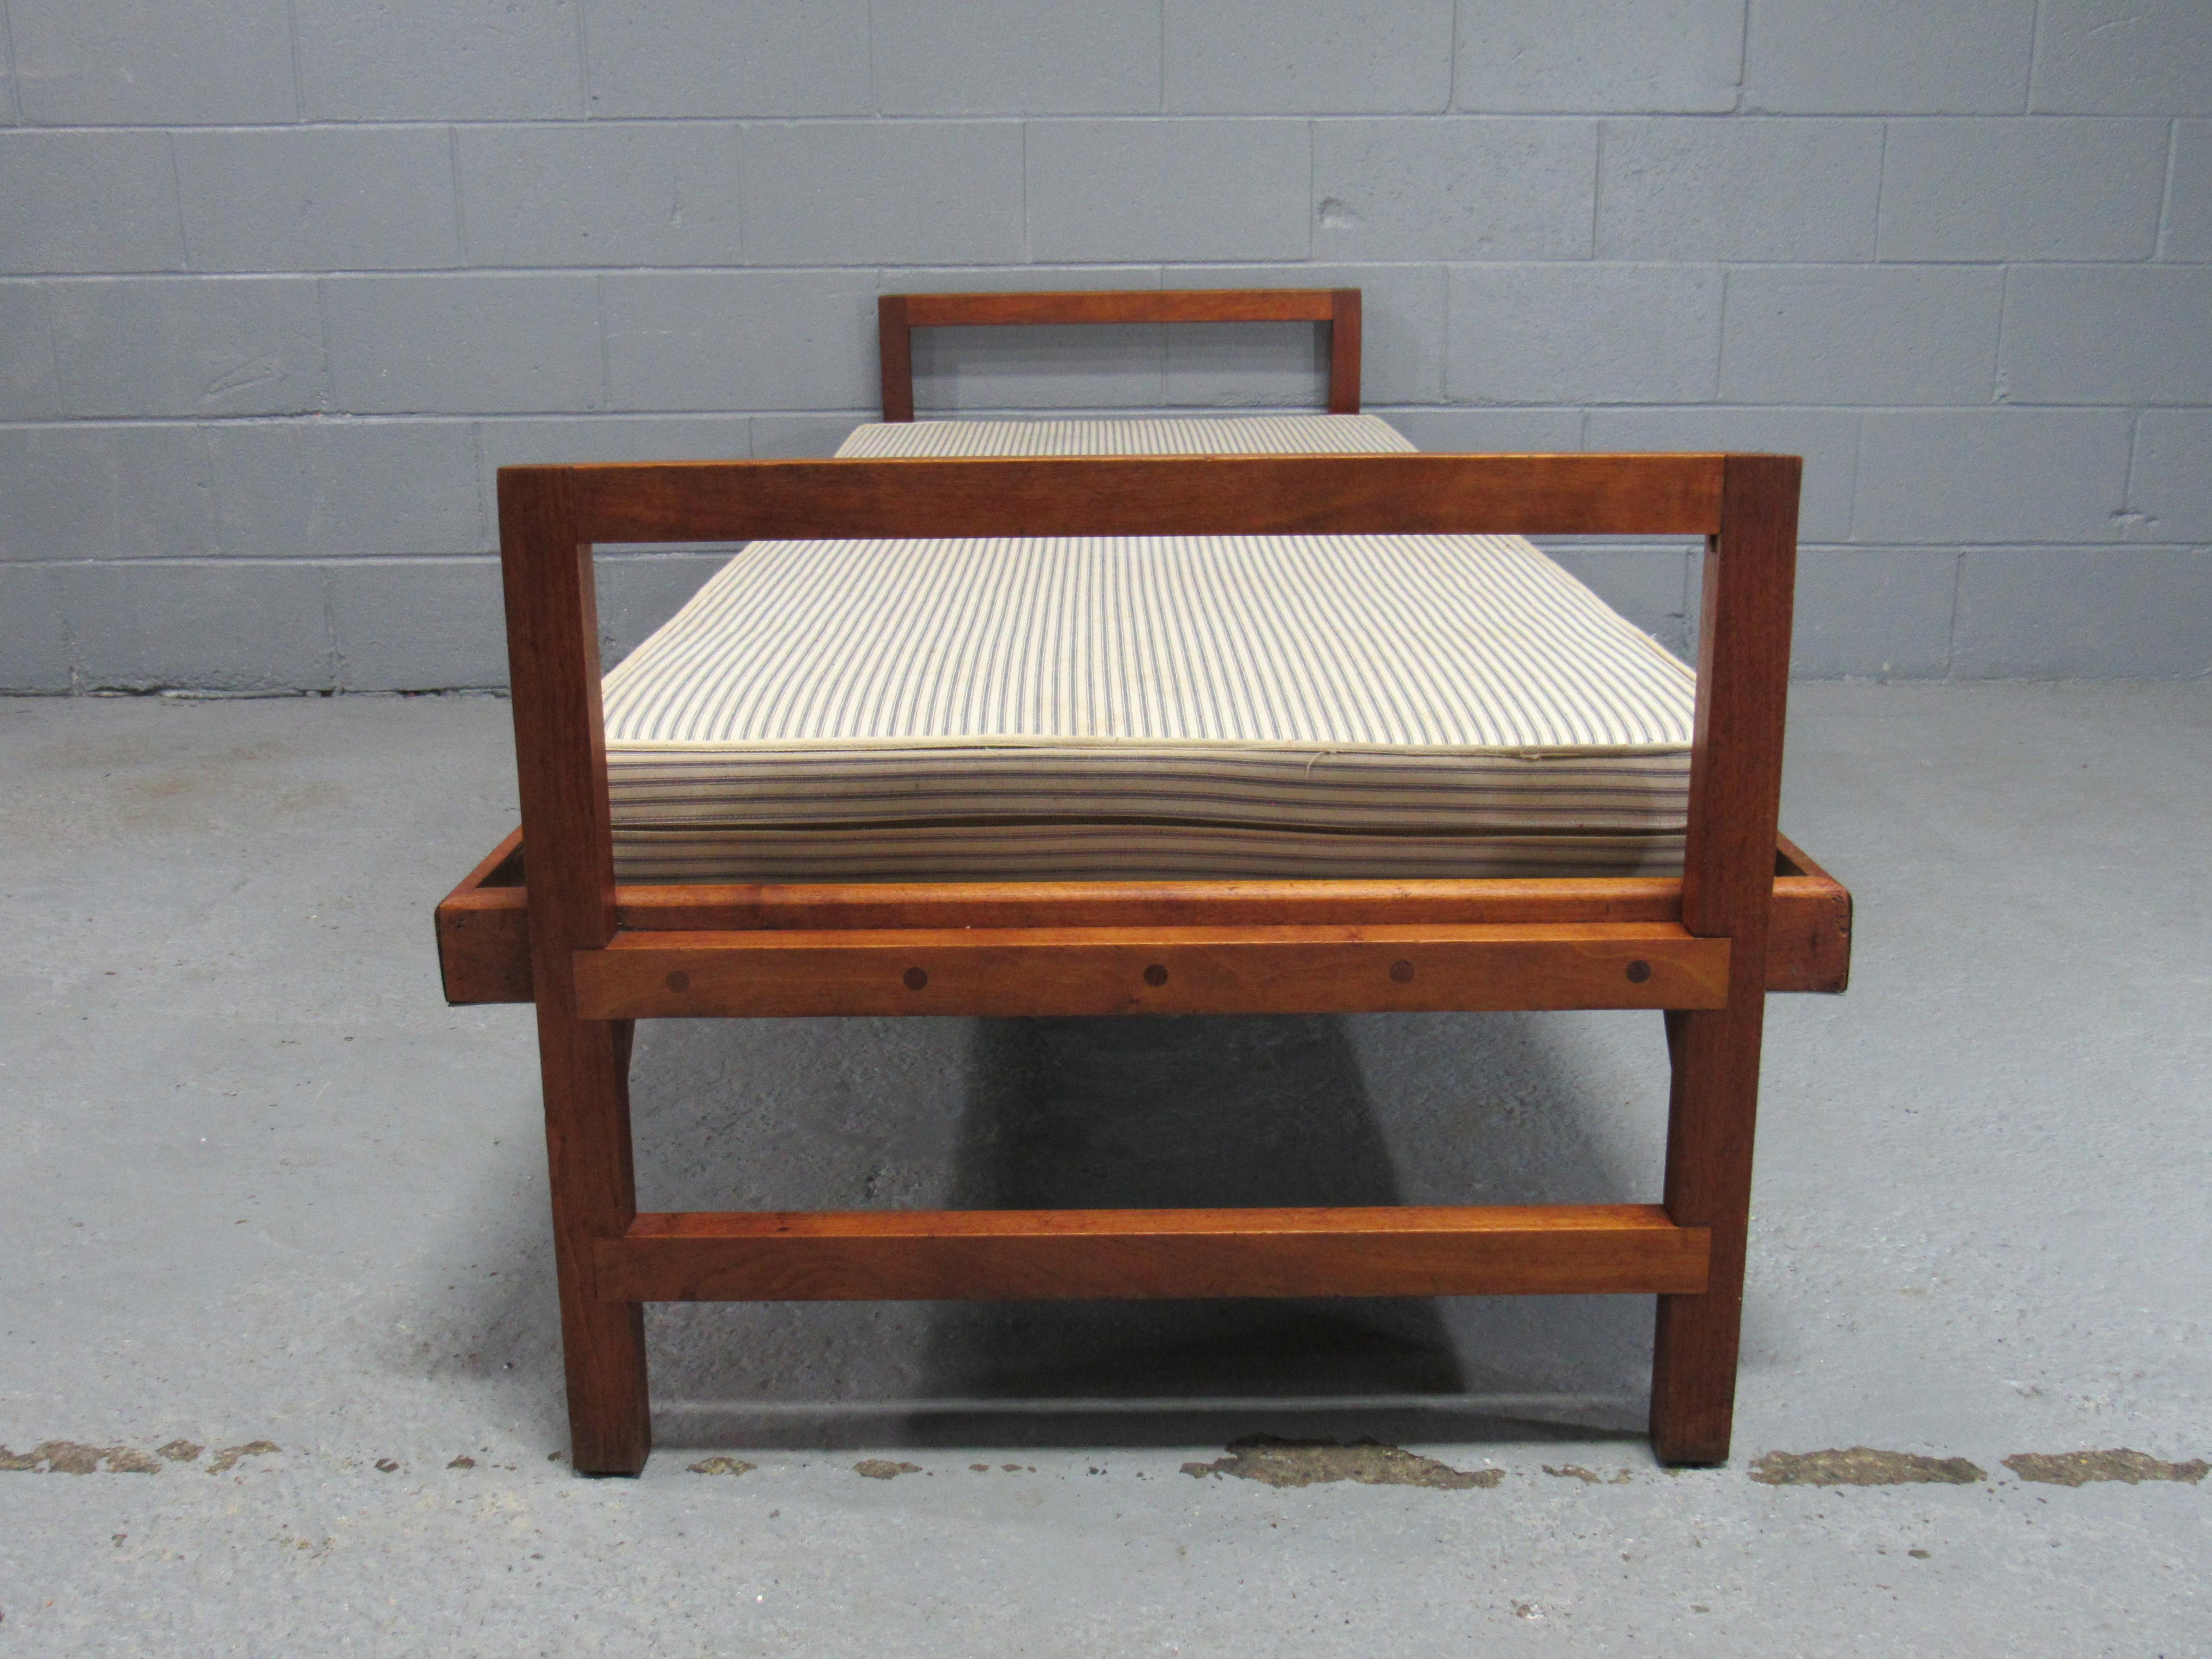 North American Mid-Century Modern Solid Walnut Trundle Pull-Out Daybed by Design Research